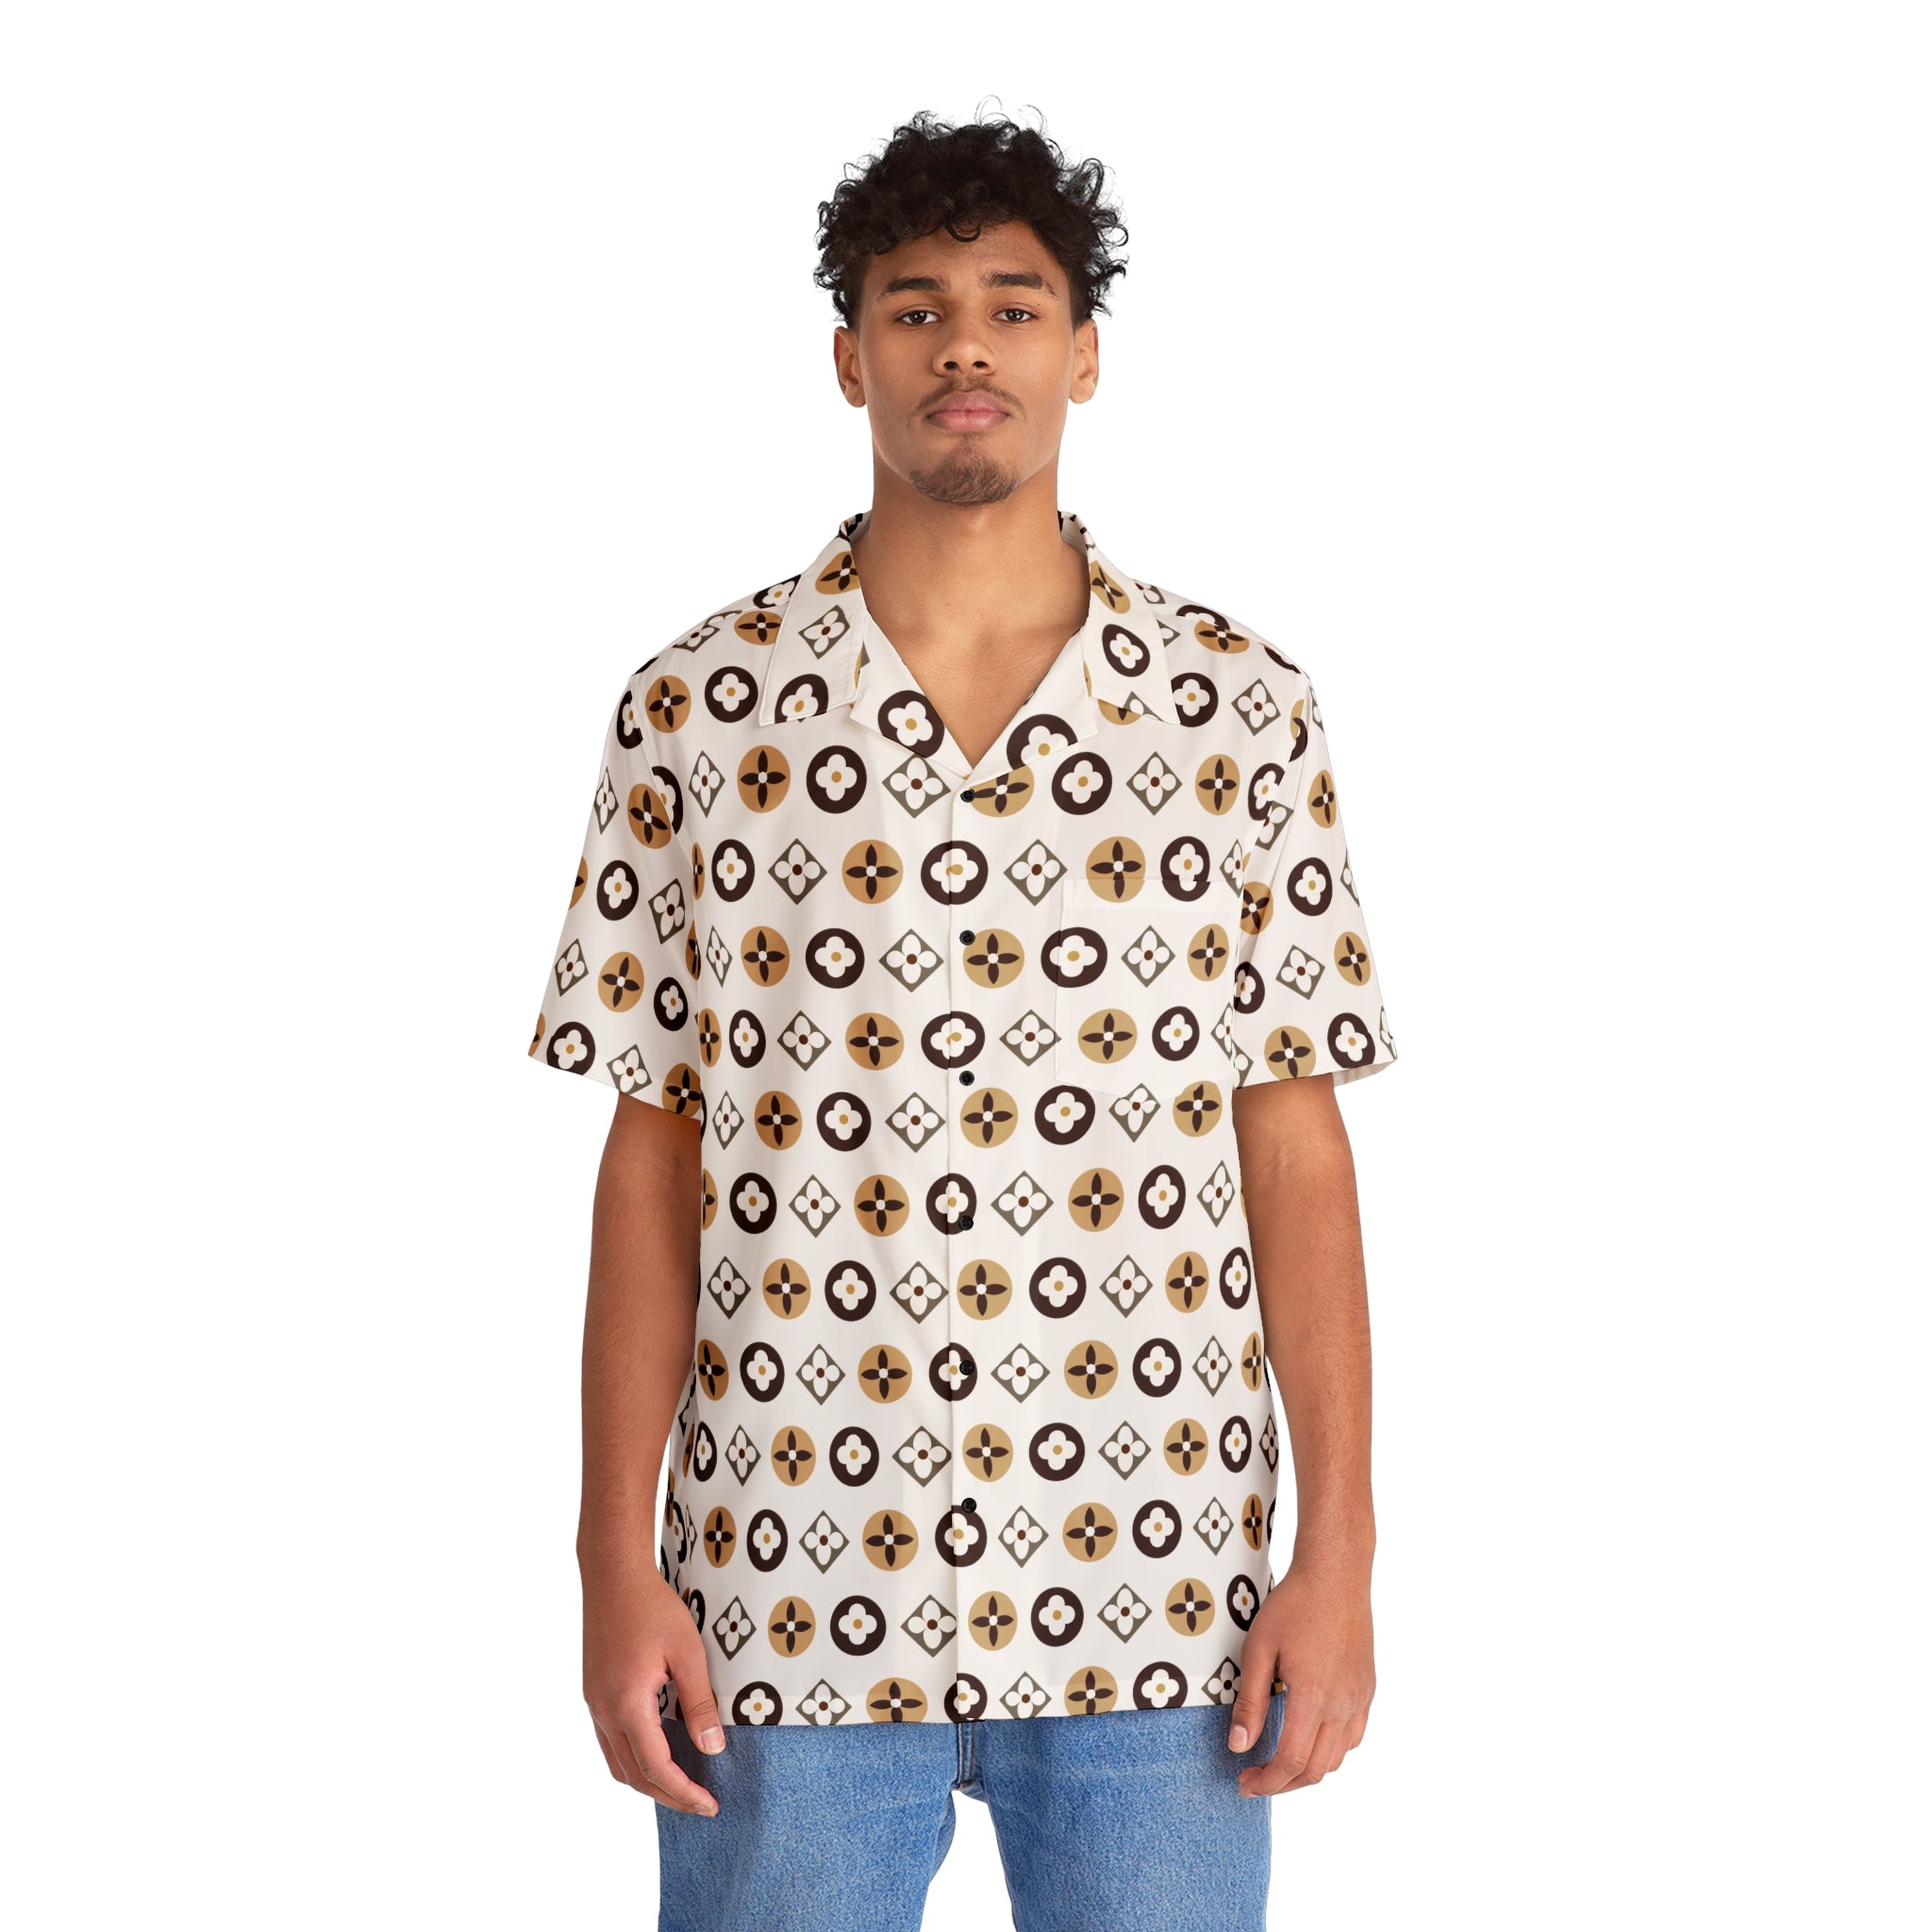  Groove Collection Trilogy of Icons Pattern (Browns) White Unisex Gender Neutral Button Up Shirt, Hawaiian Shirt Men's Shirts